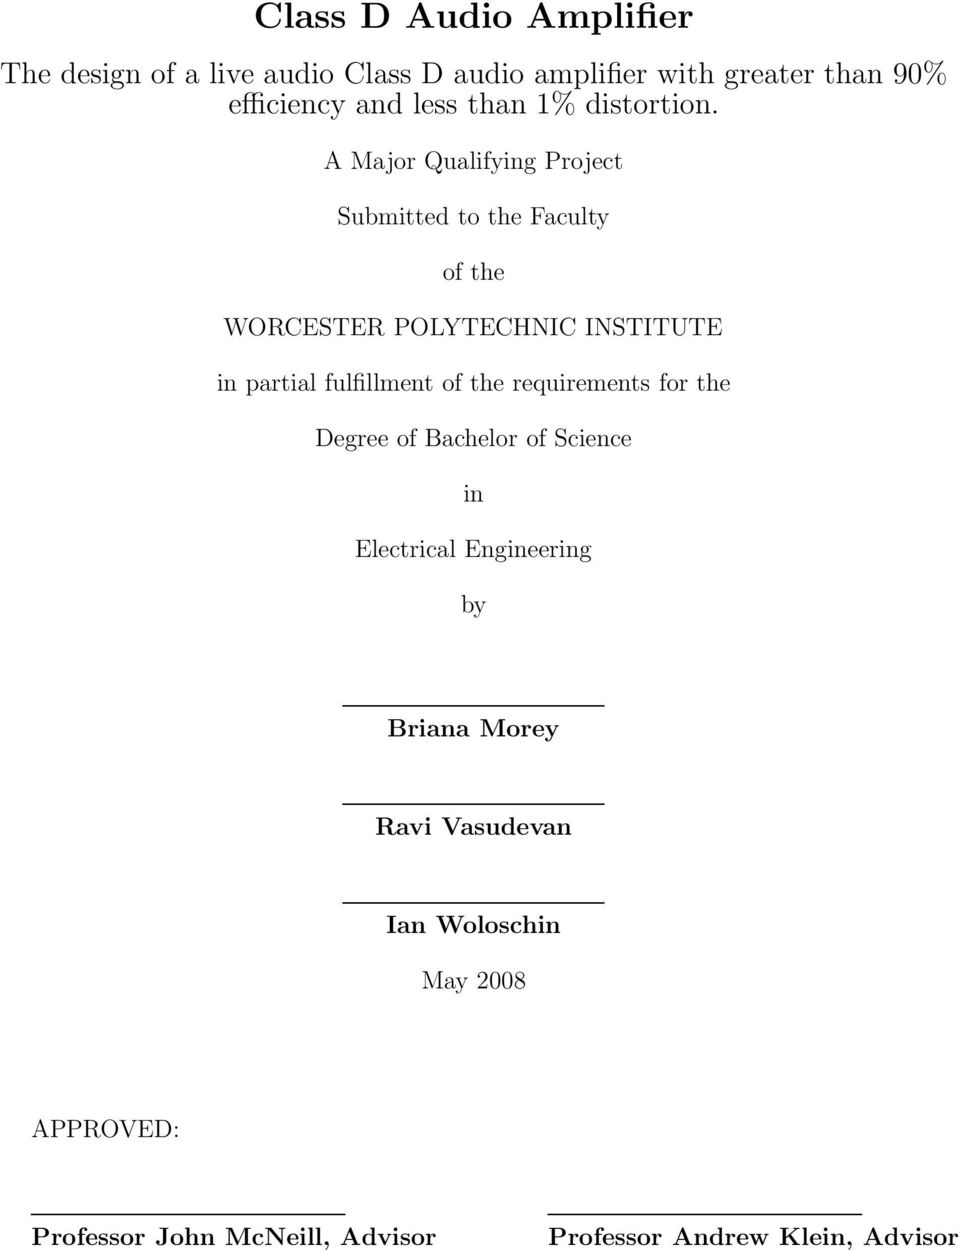 A Major Qualifying Project Submitted to the Faculty of the WORCESTER POLYTECHNIC INSTITUTE in partial fulfillment